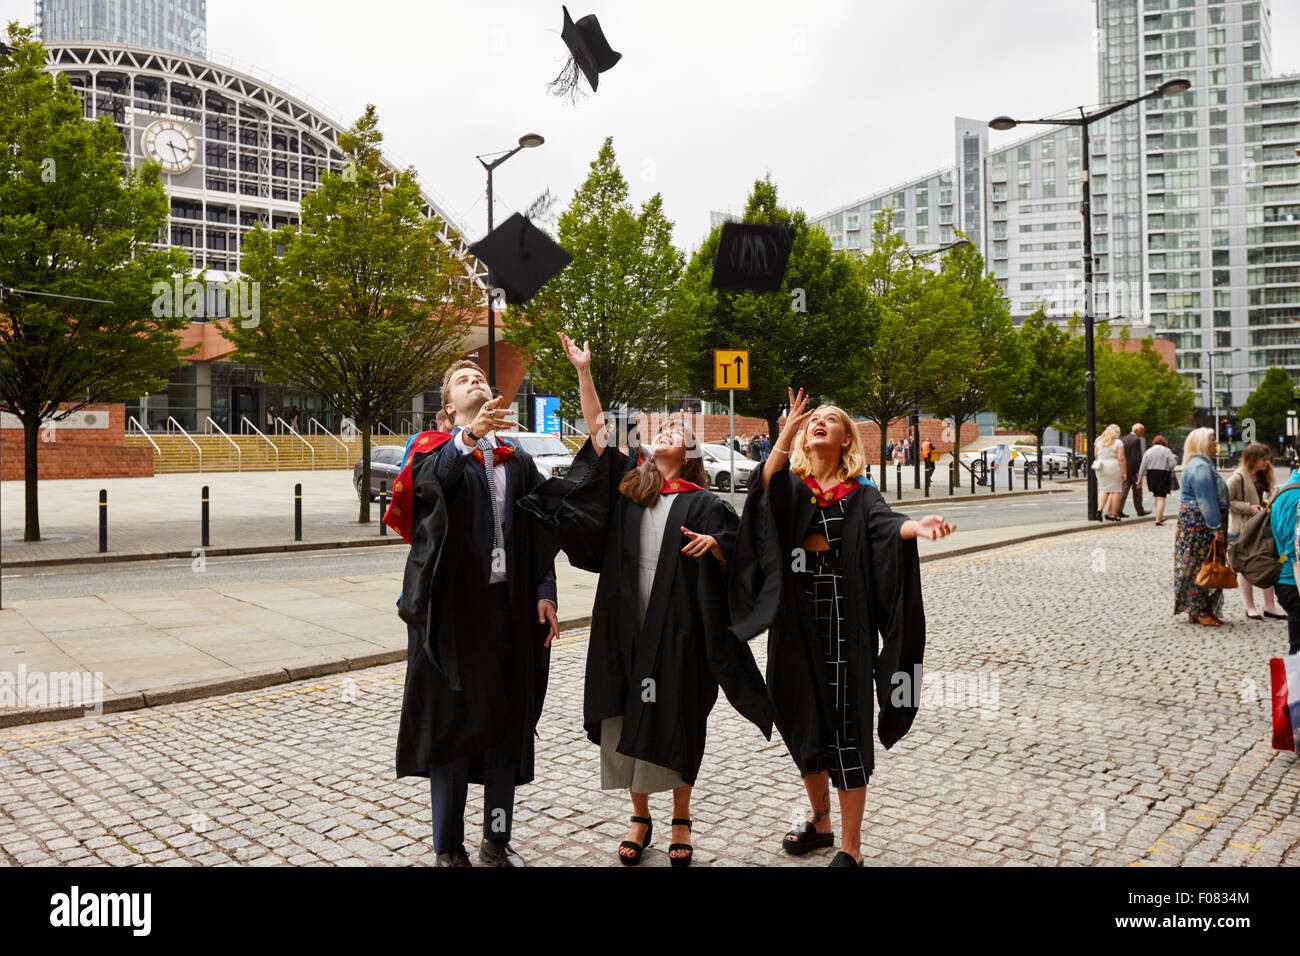 graduates throw mortar board hats in the air after graduation ceremony in Manchester England UK Stock Photo